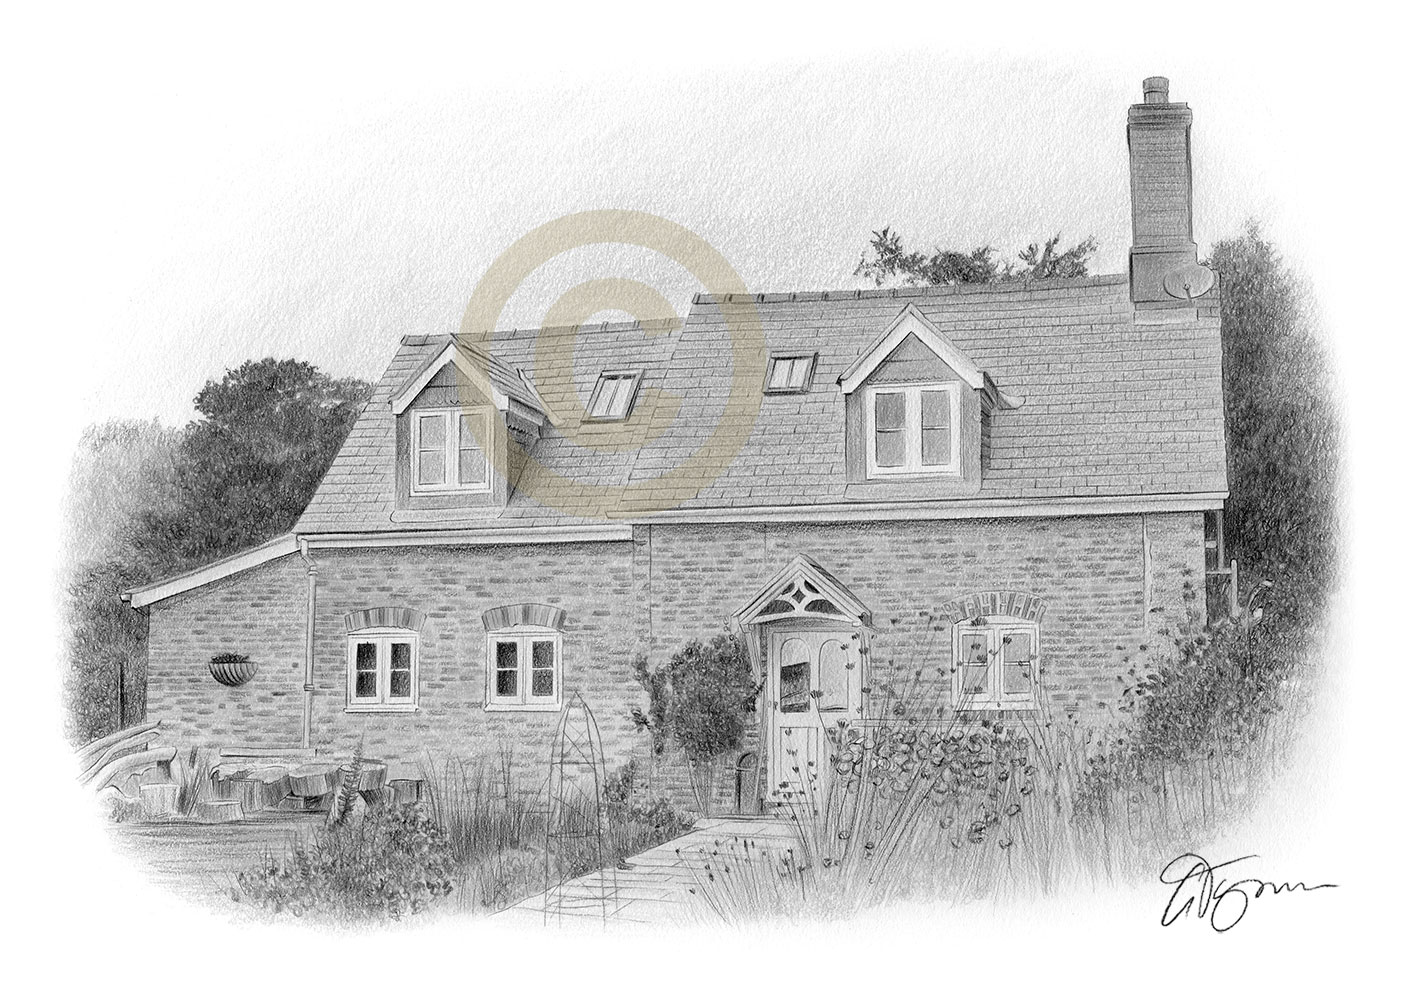 Pencil drawing commission of a country house by artist Gary Tymon